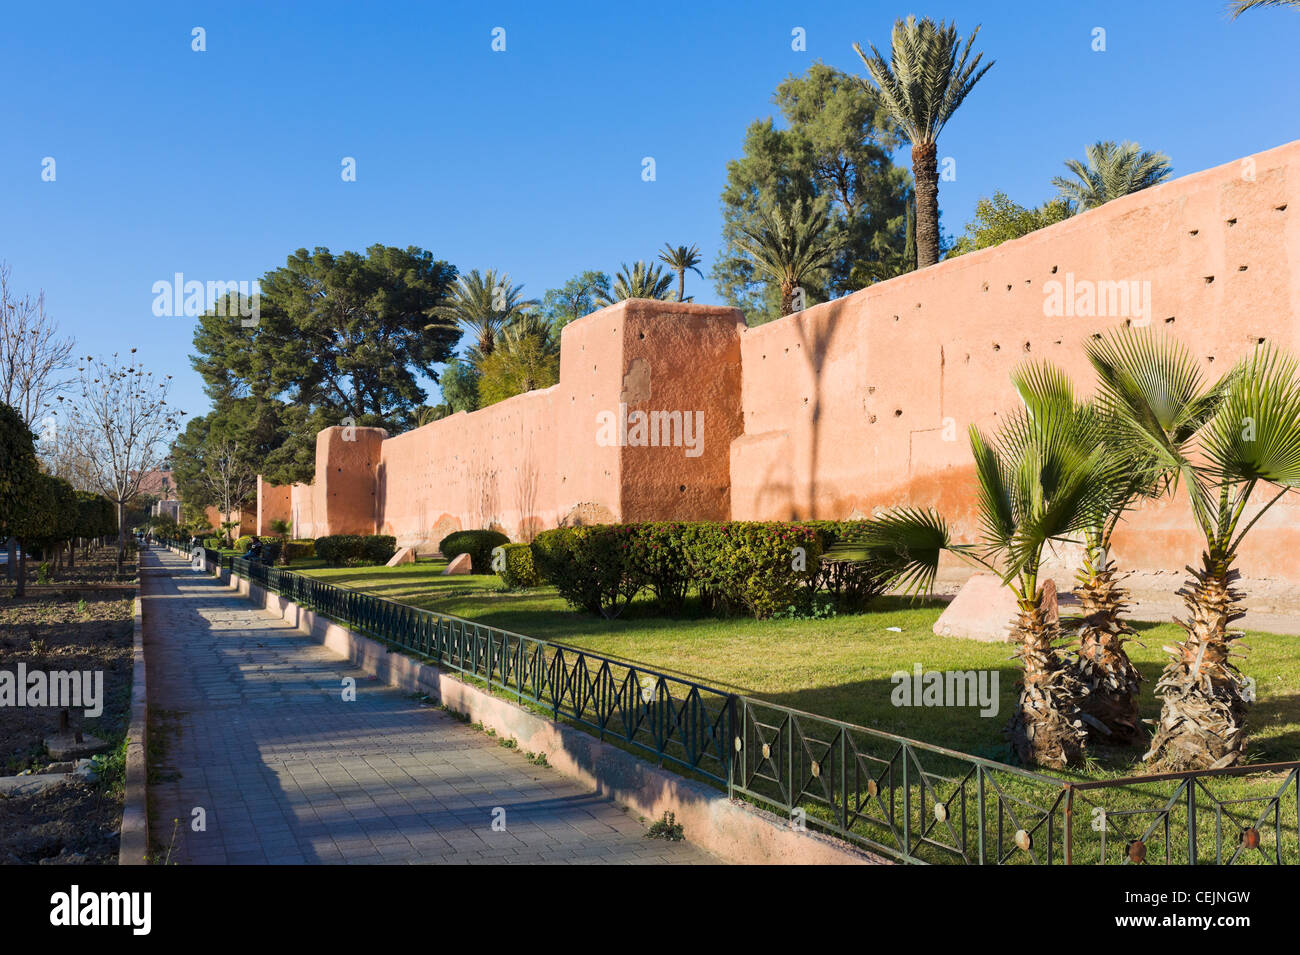 Old city walls surrounding the Medina district, Marrakech, Morocco, North Africa Stock Photo